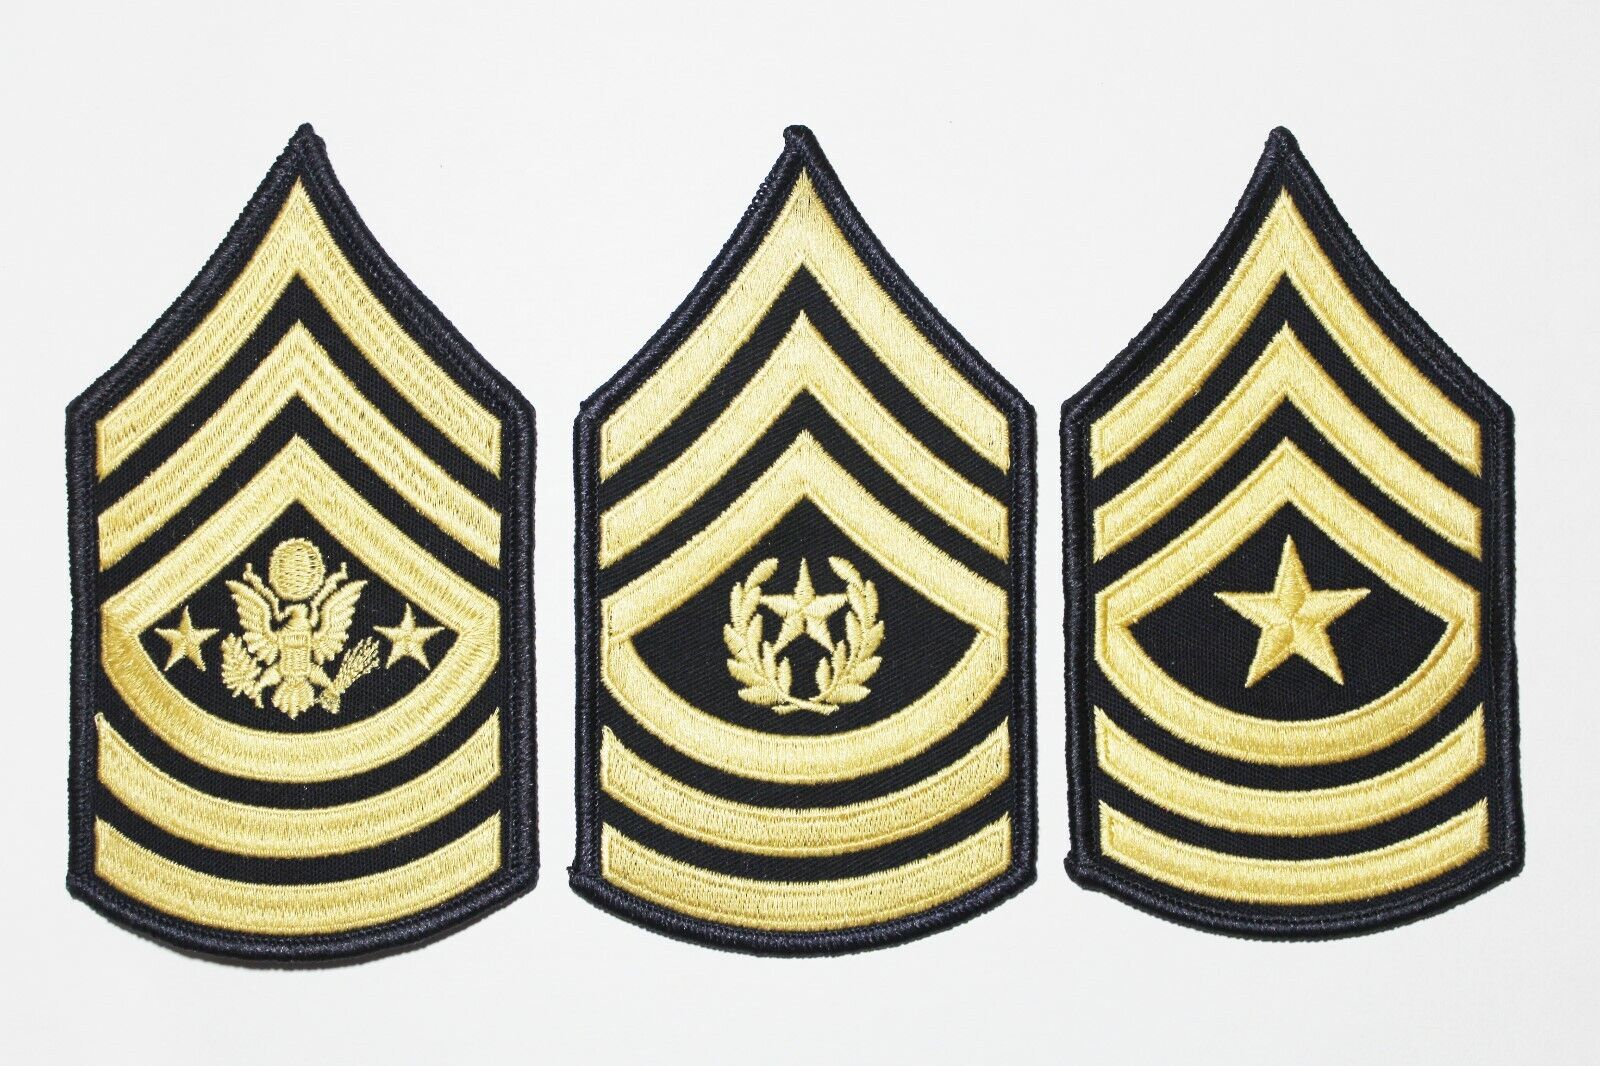 3 PAIR Army Leadership Sergeant Major Rank Gold on Blue Chevron Patches - Female